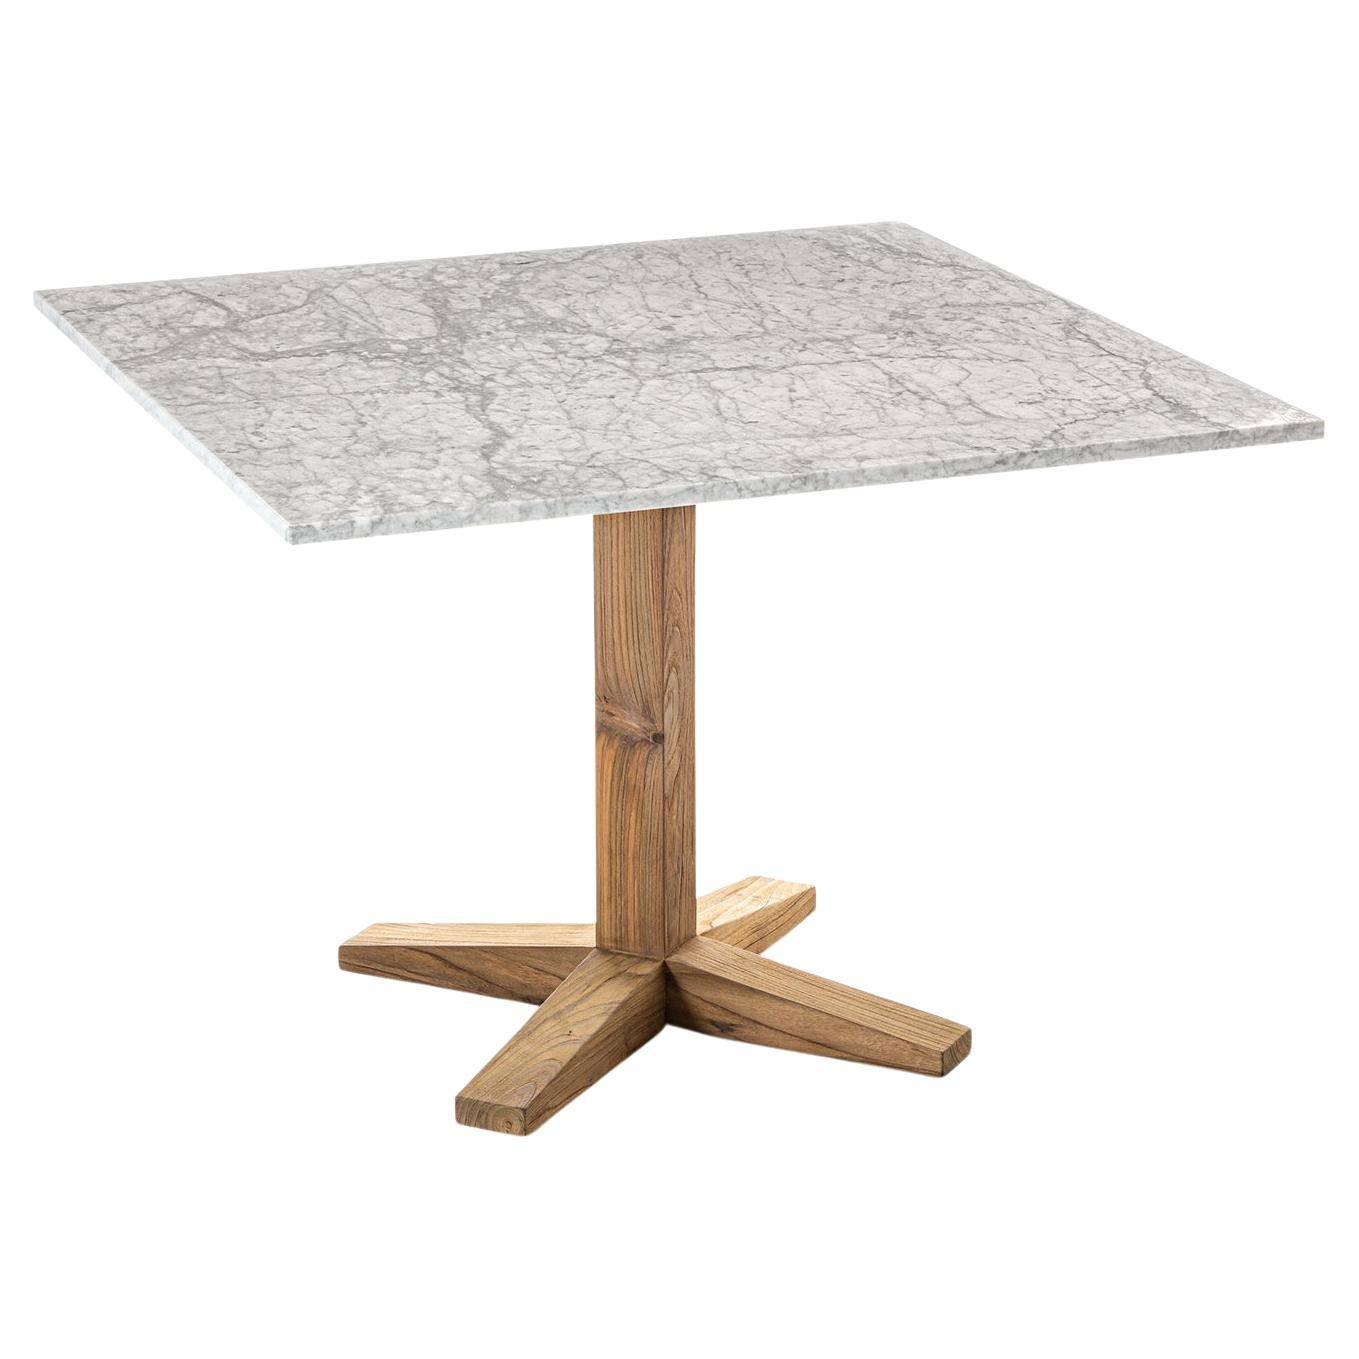 Barletta Table Square Low For Sale